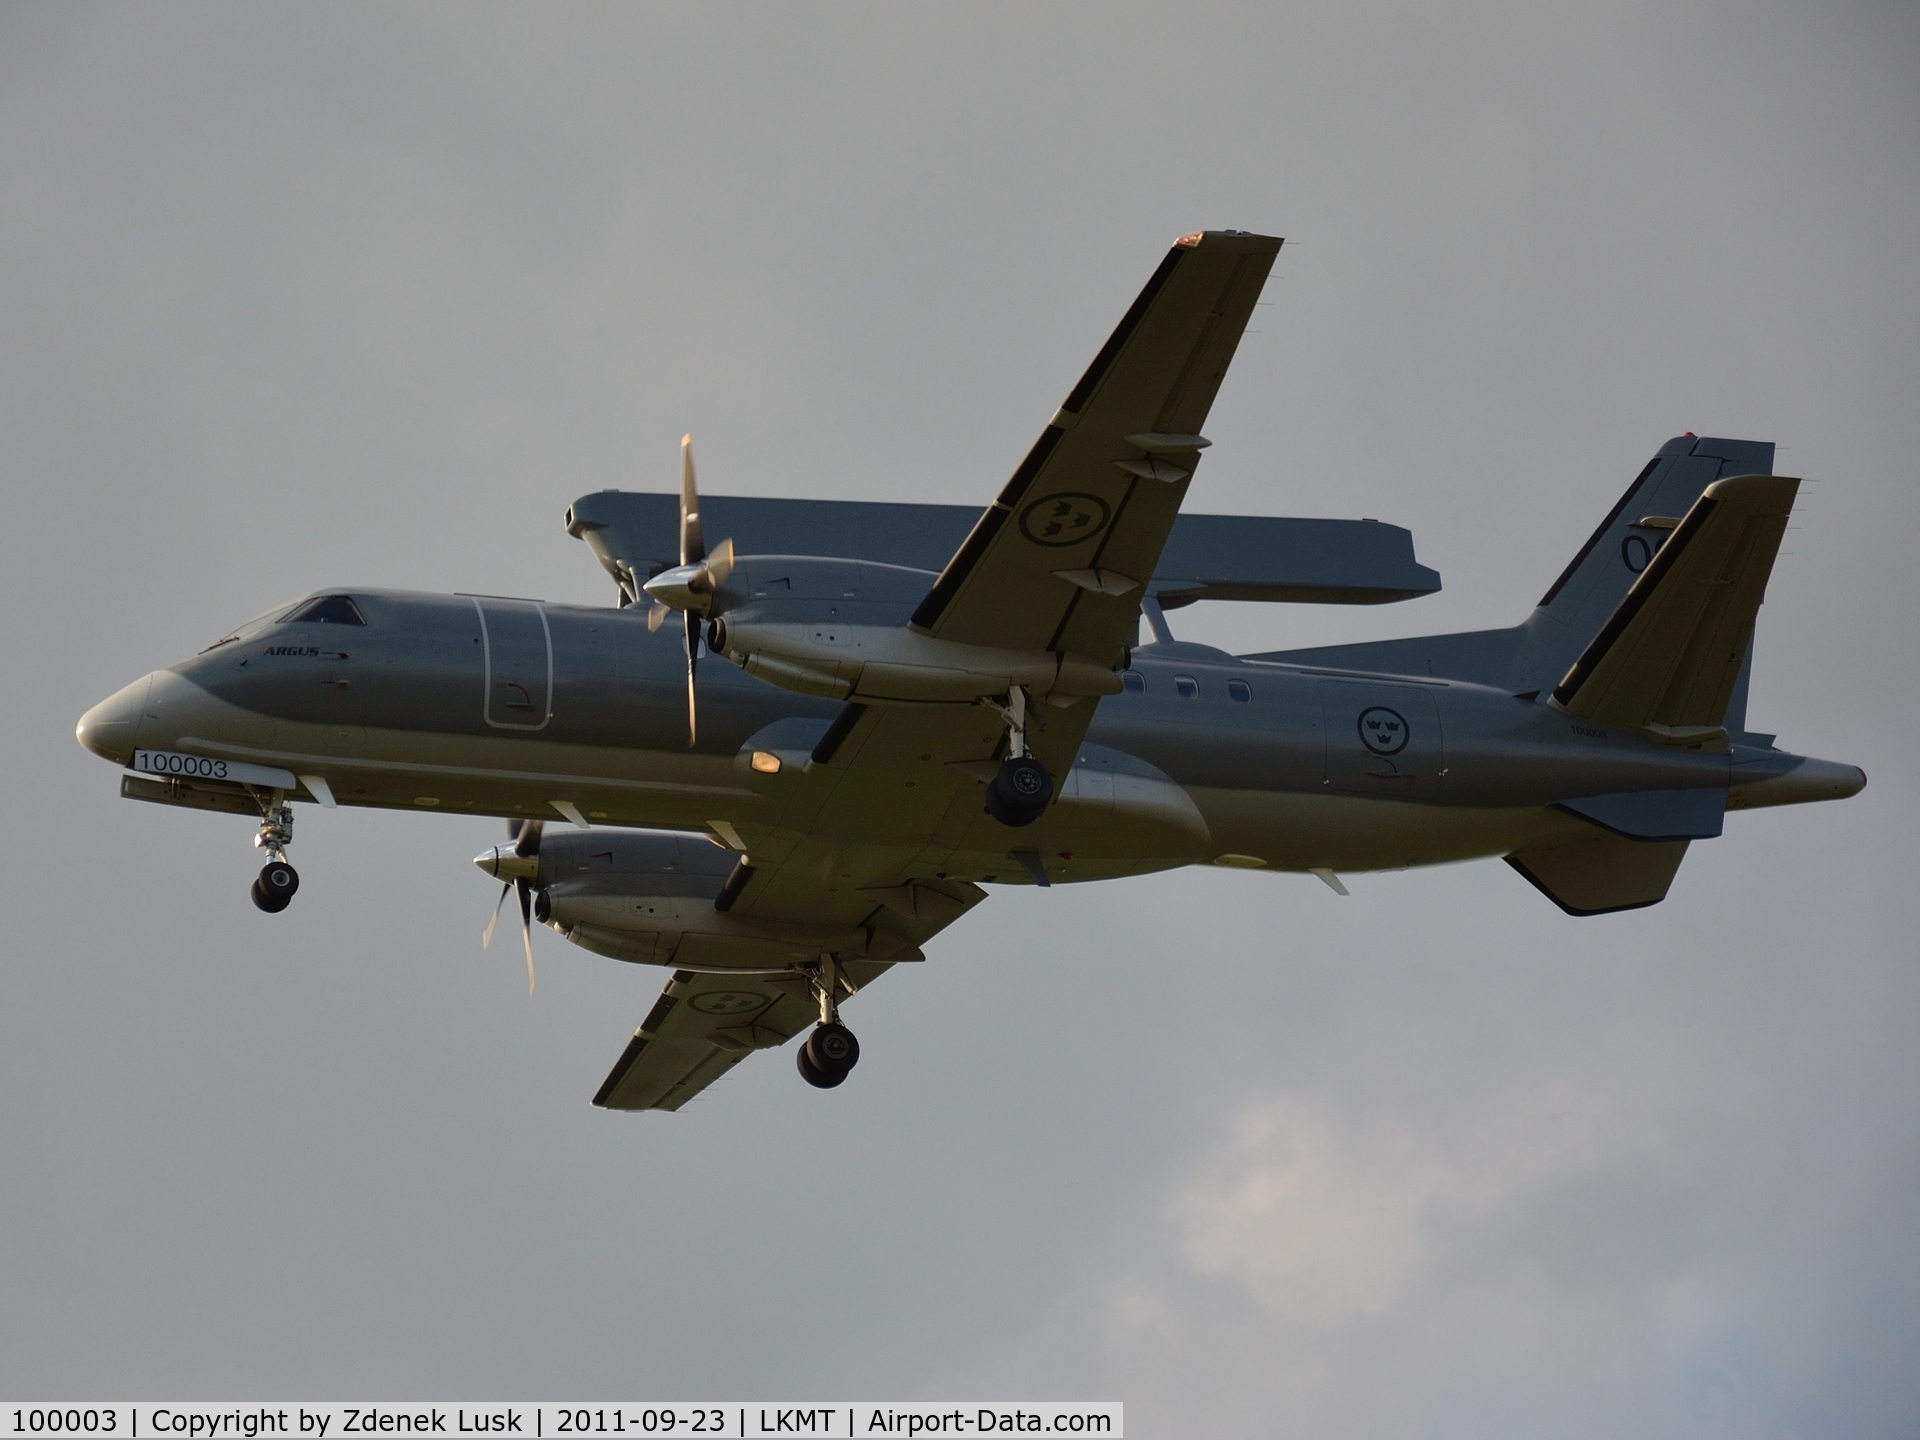 100003, 1996 Saab S100D Argus (340AEW) C/N 340B-379, Arrival to Days of NATO 2011 event.